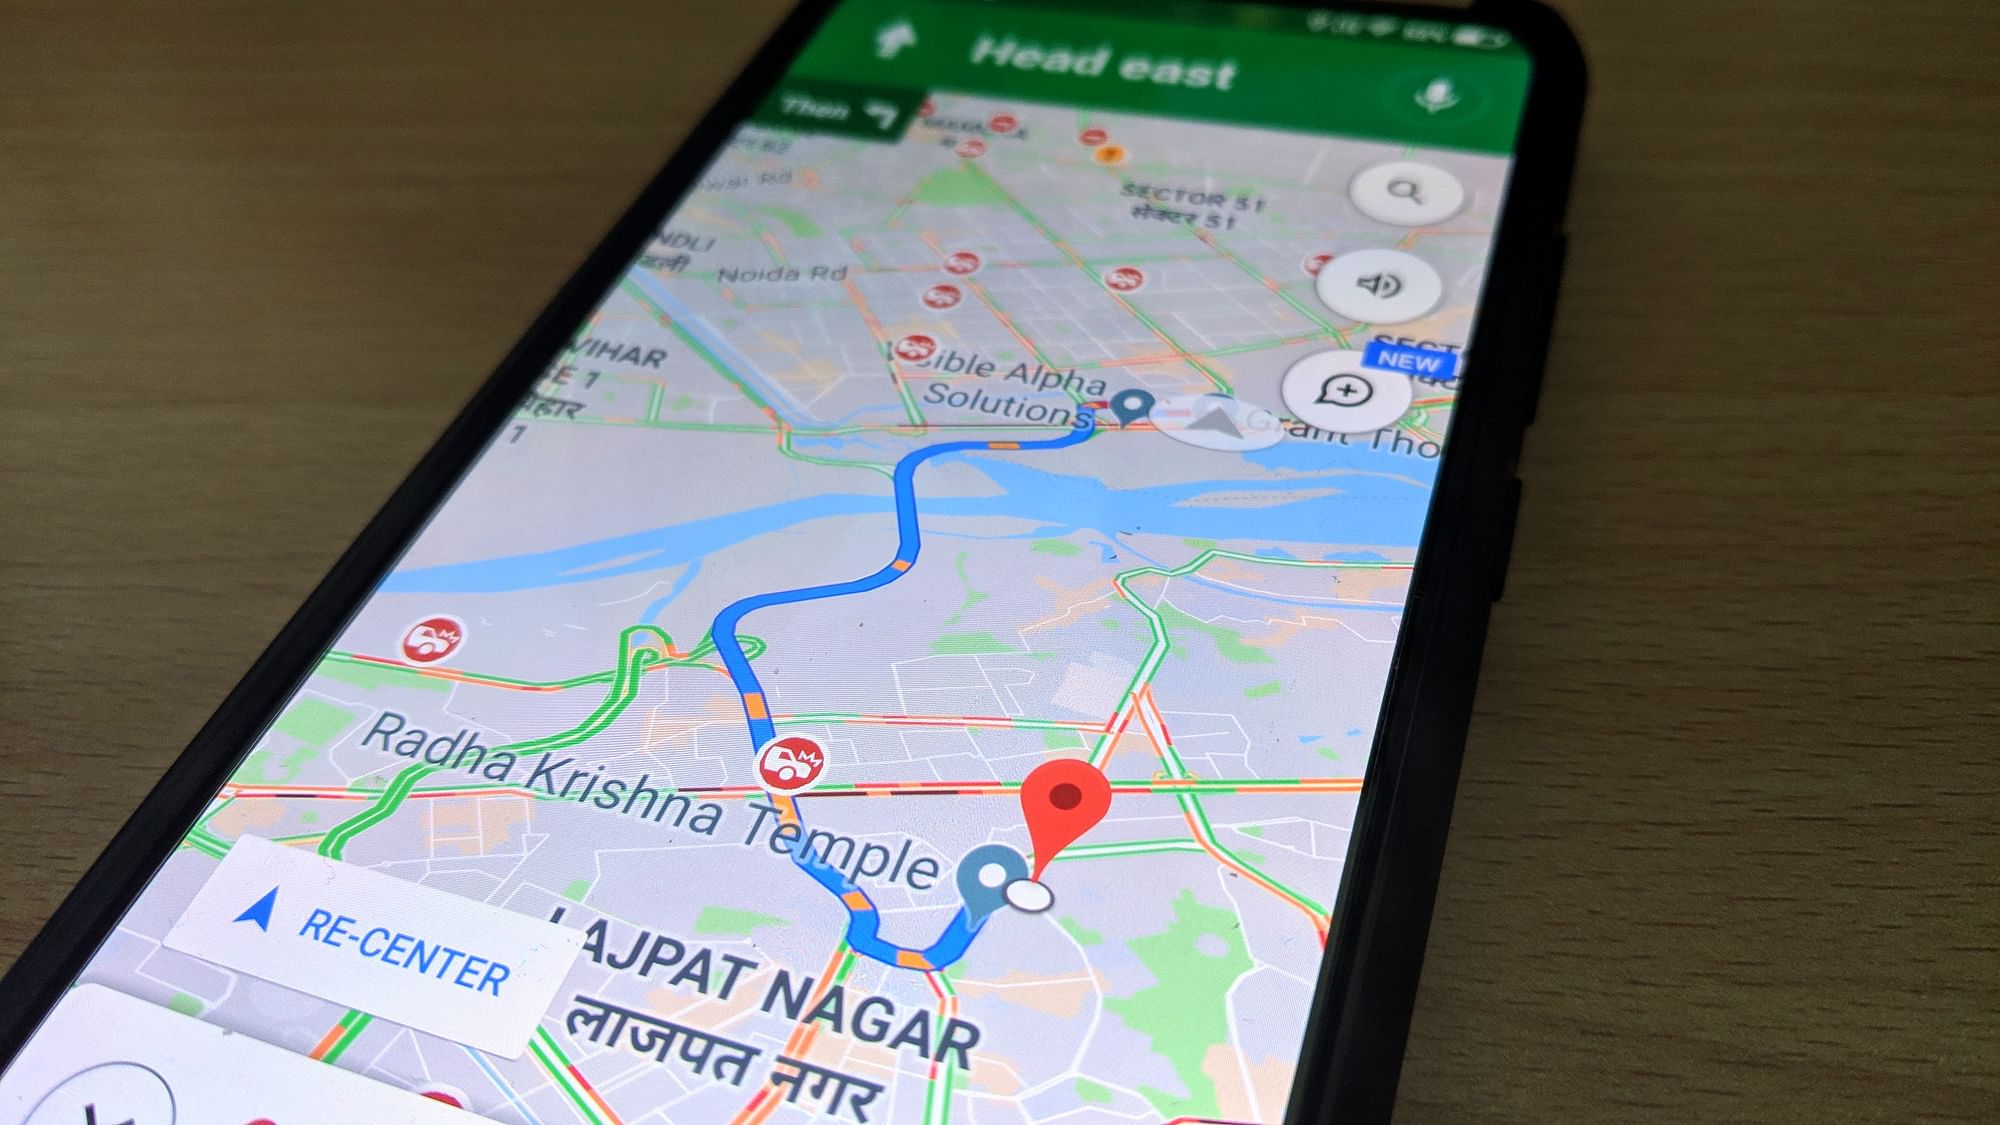 Google Maps now shows nearest food and night shelters.